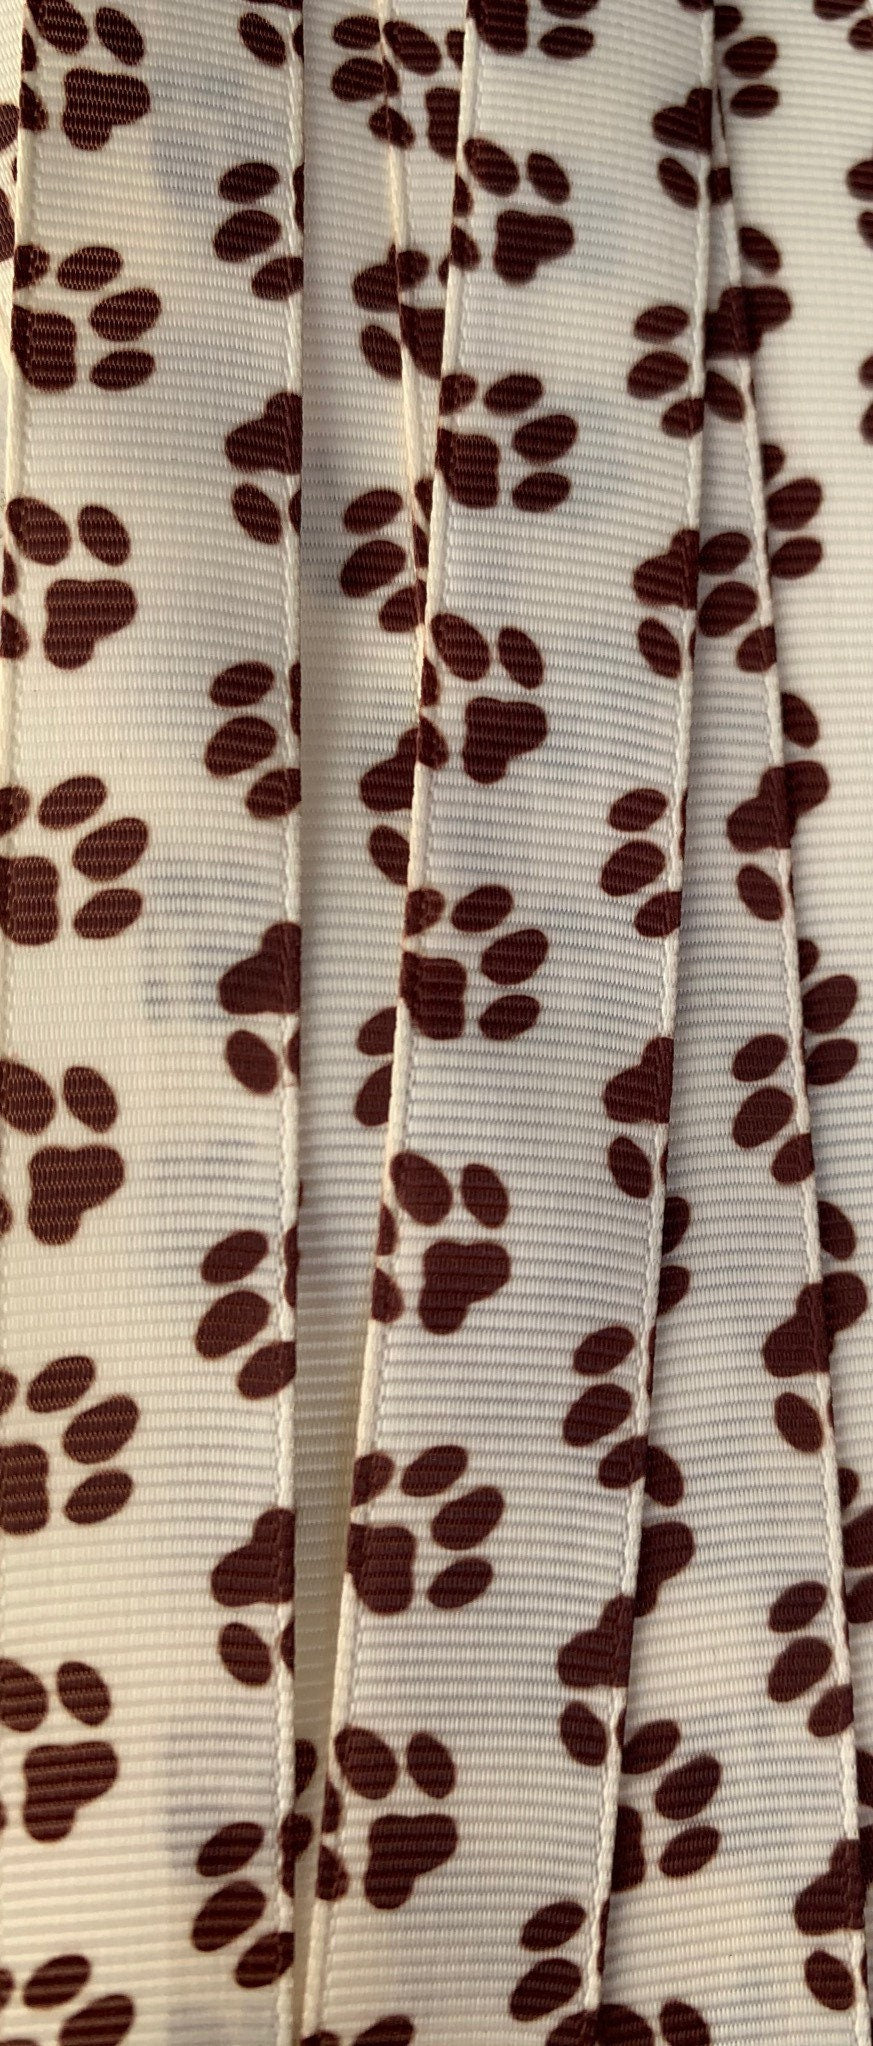 Puppy dog paws brown 5 yards on Ivory 5/8” grosgrain ribbon * TWRH limited stock.